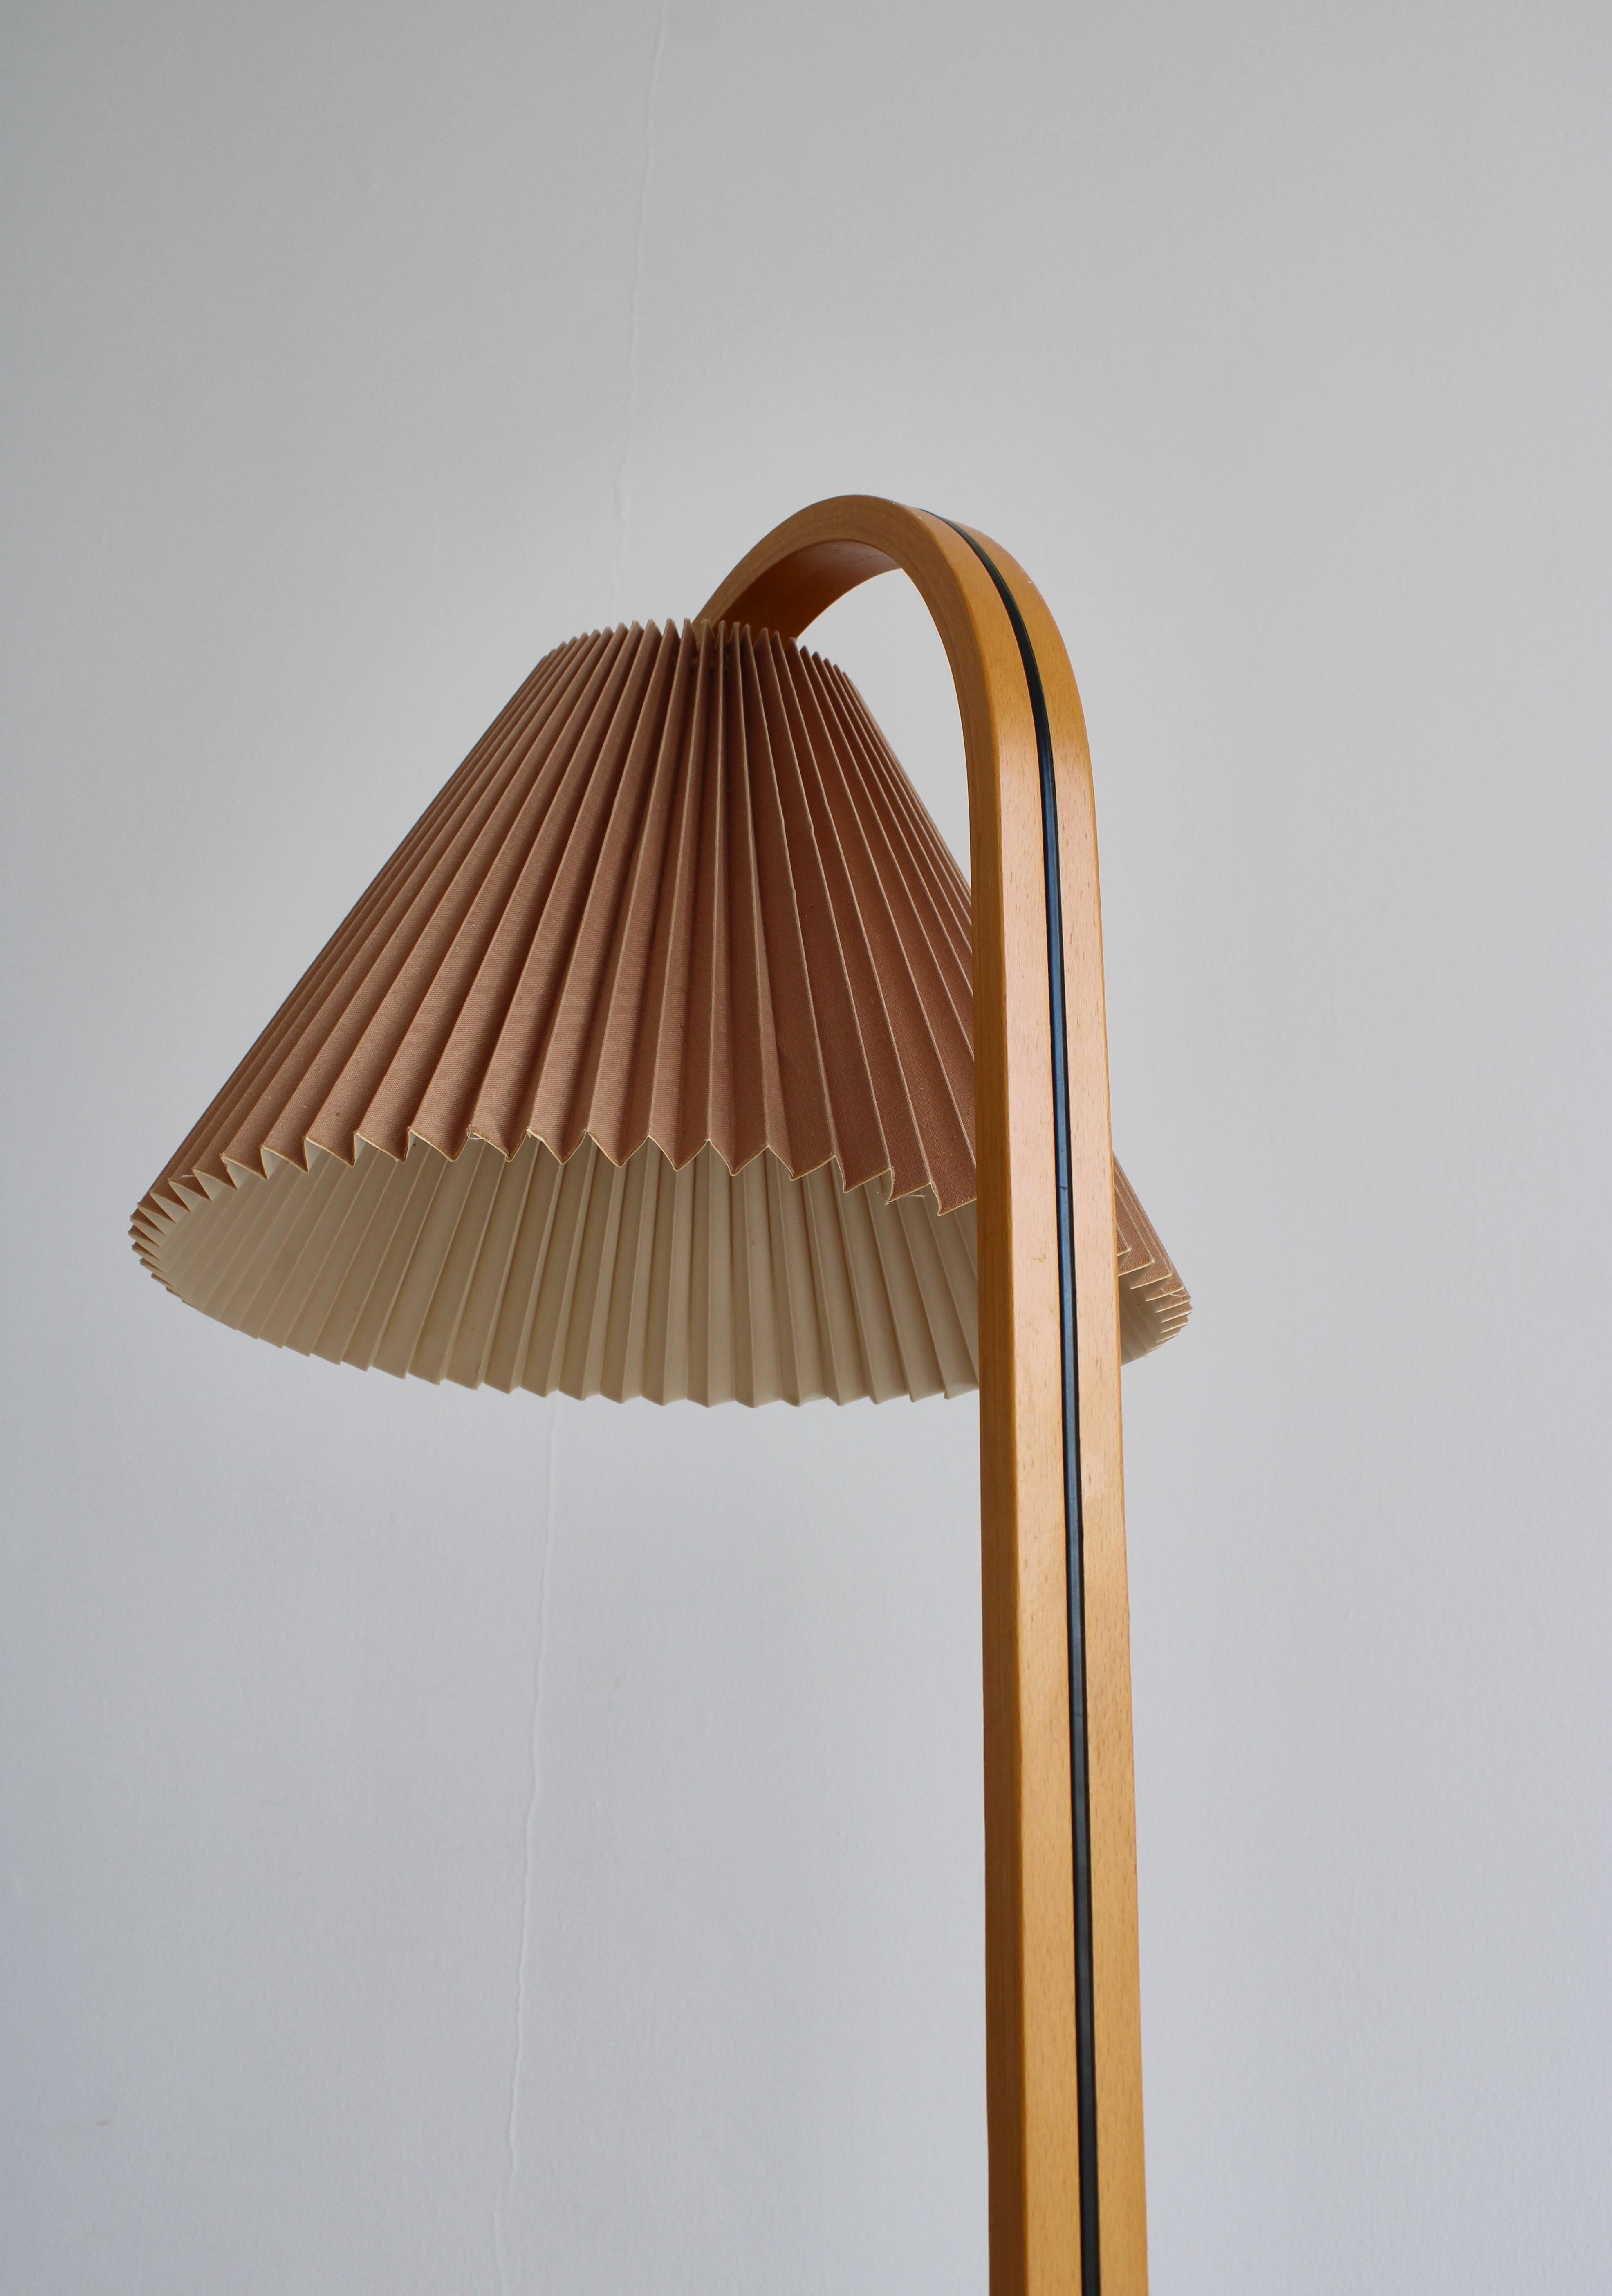 Caprani Light Floor Lamp by Mads Caprani, Denmark, 1970s In Good Condition For Sale In Odense, DK